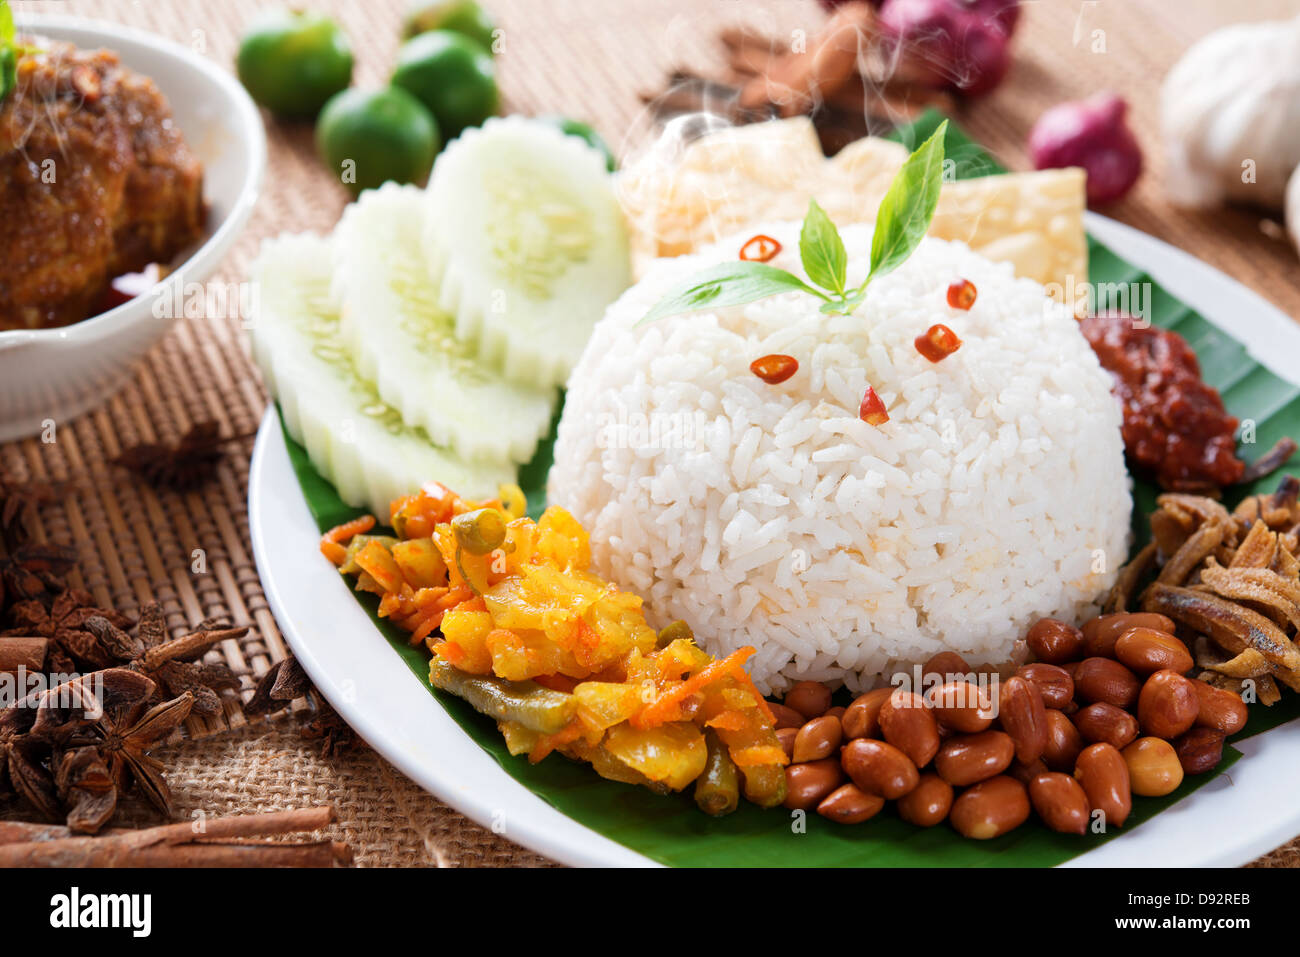 Nasi lemak kukus traditional malaysian spicy rice dish, fresh cooked with hot steam. Served with belacan, ikan bilis, acar, peanuts and cucumber. Decoration setup. Stock Photo